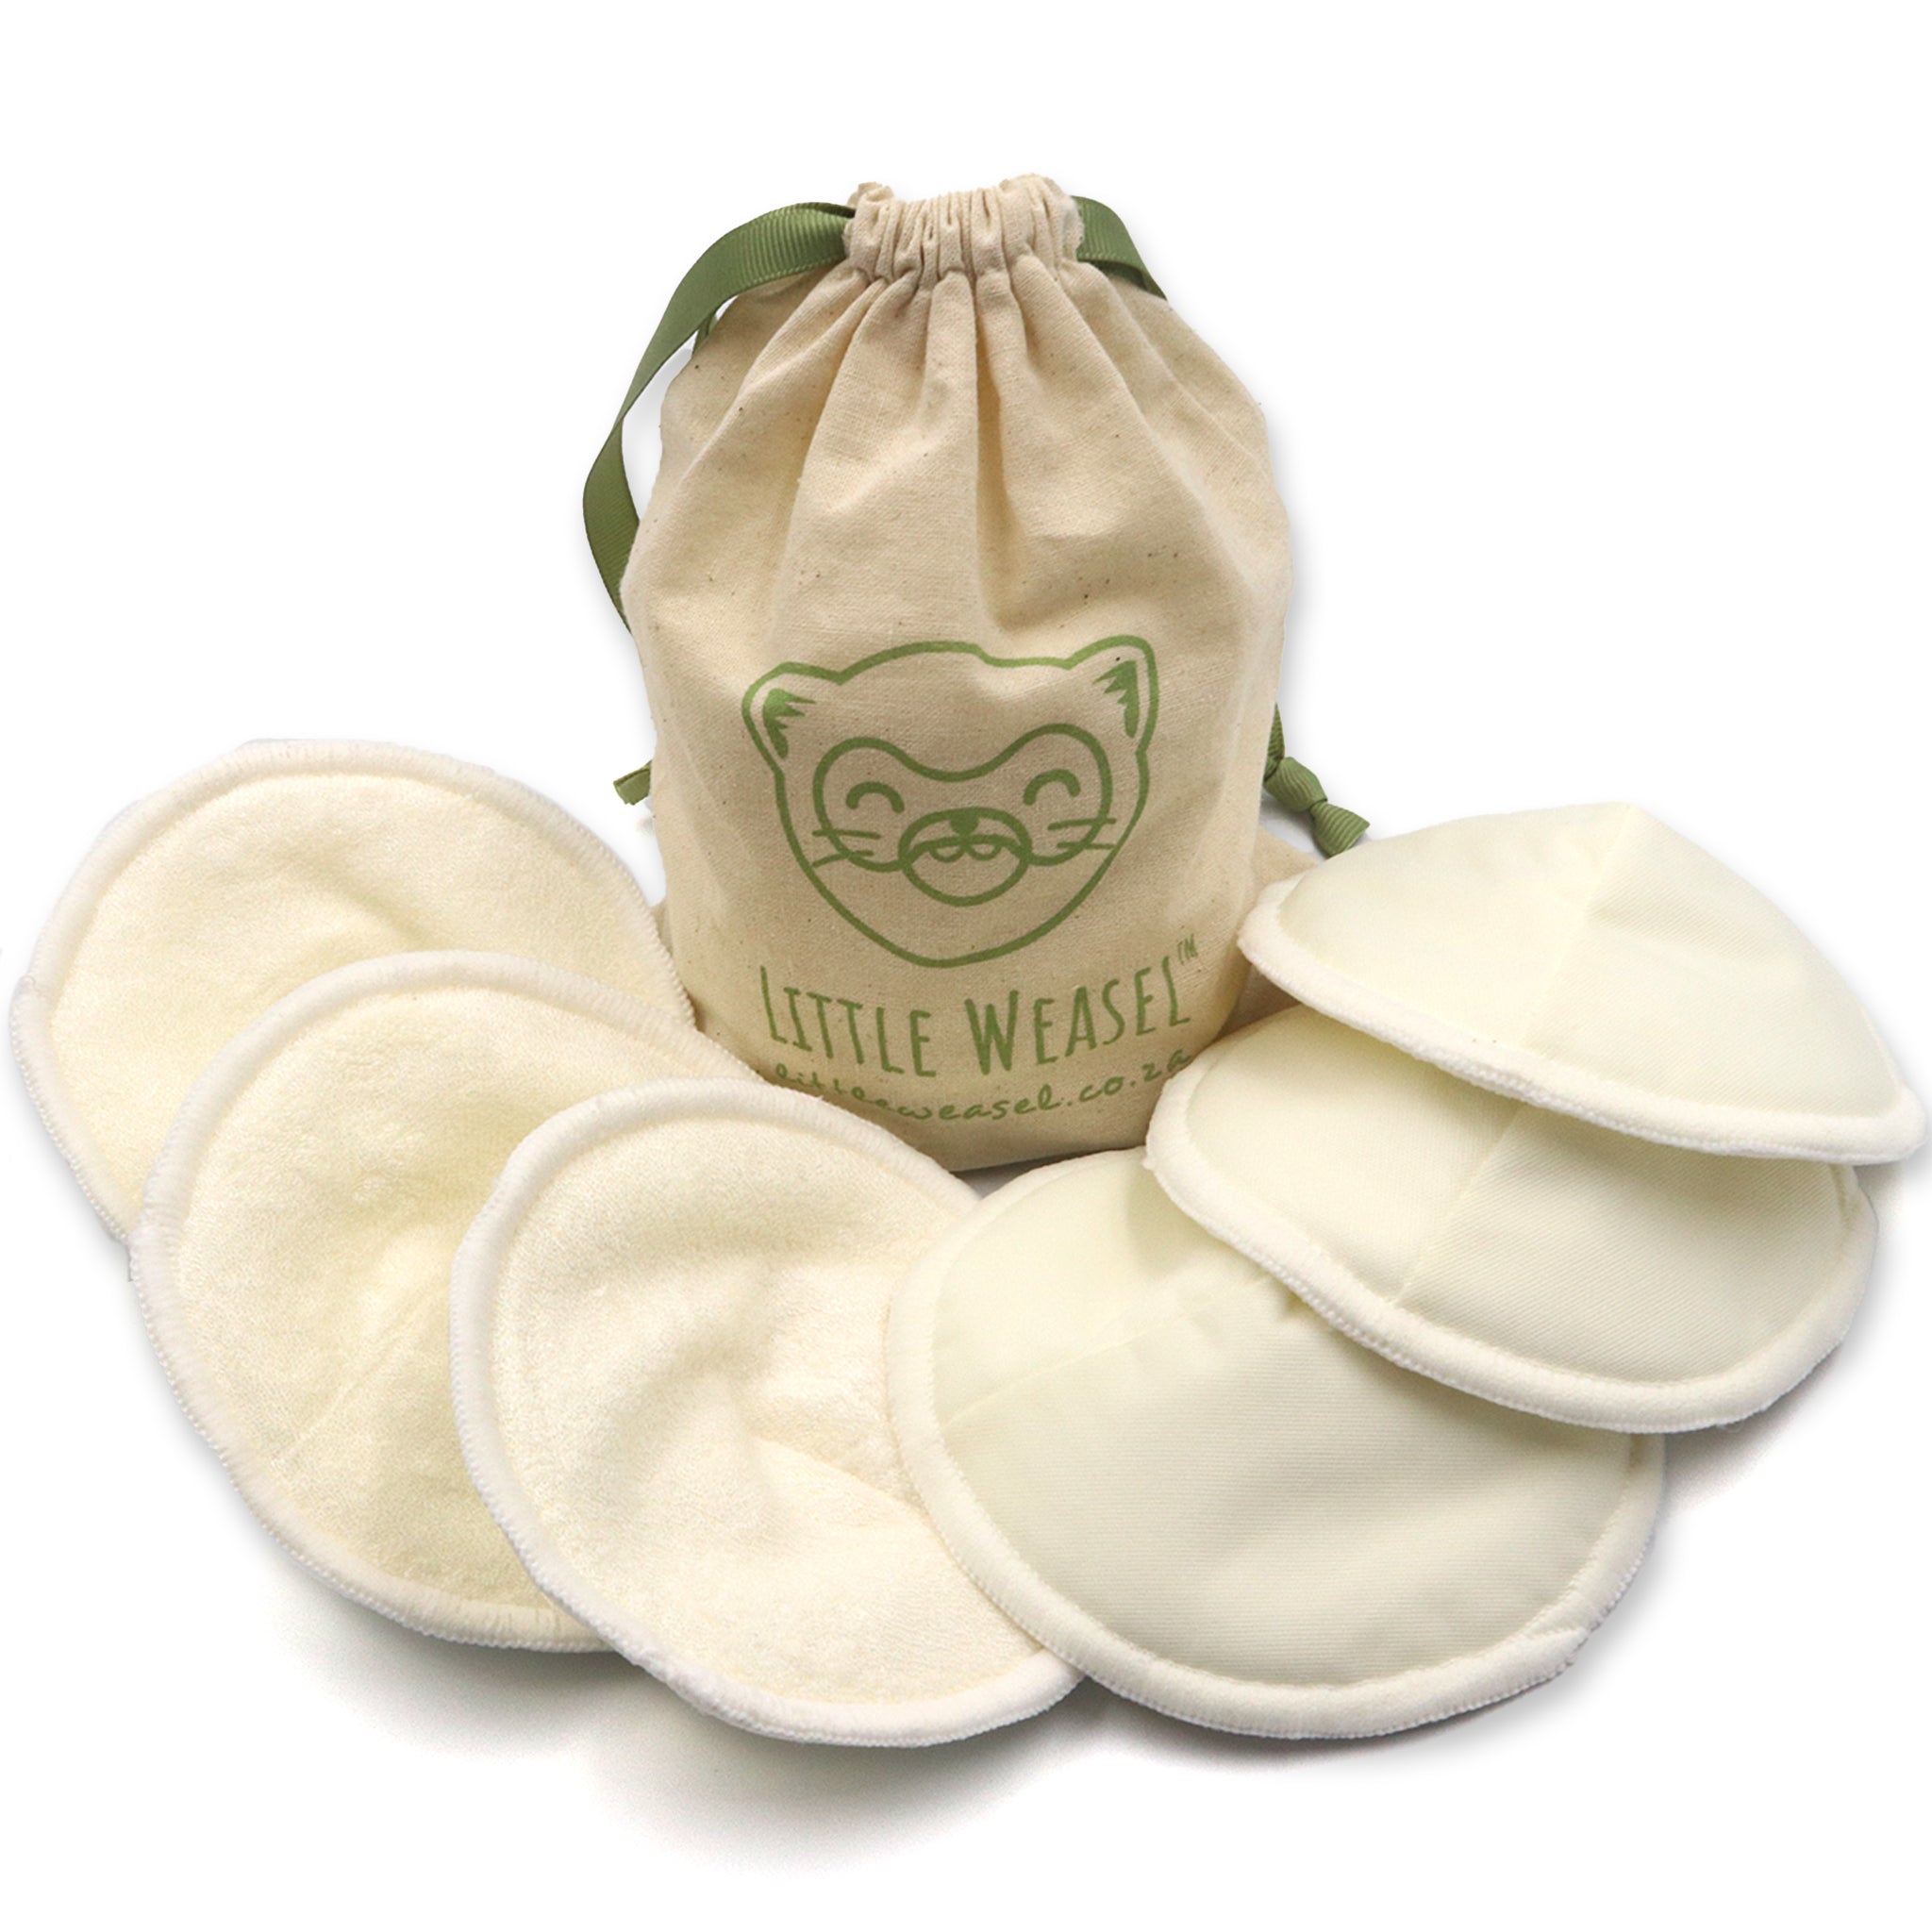 Washable Breast Pads - 3 Pairs, 1 Bag